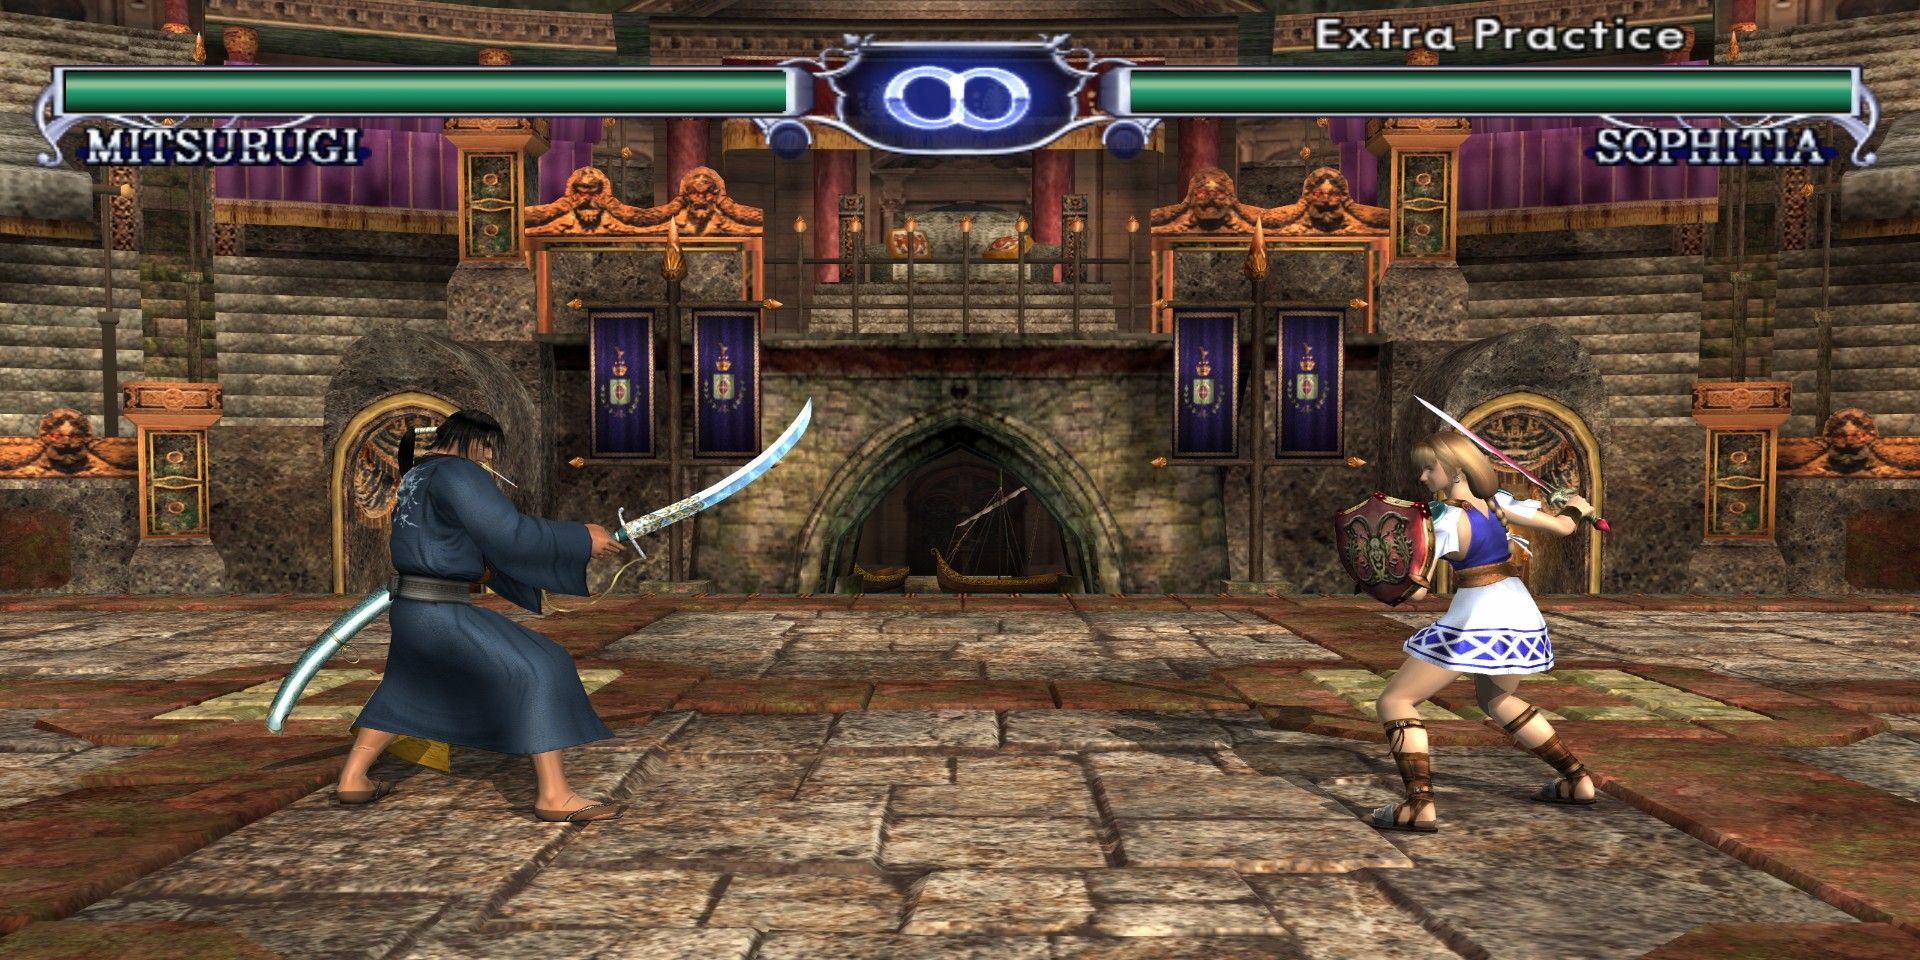 More Fighting Games Need Mortal Kombat: Deception’s Konquest Mode